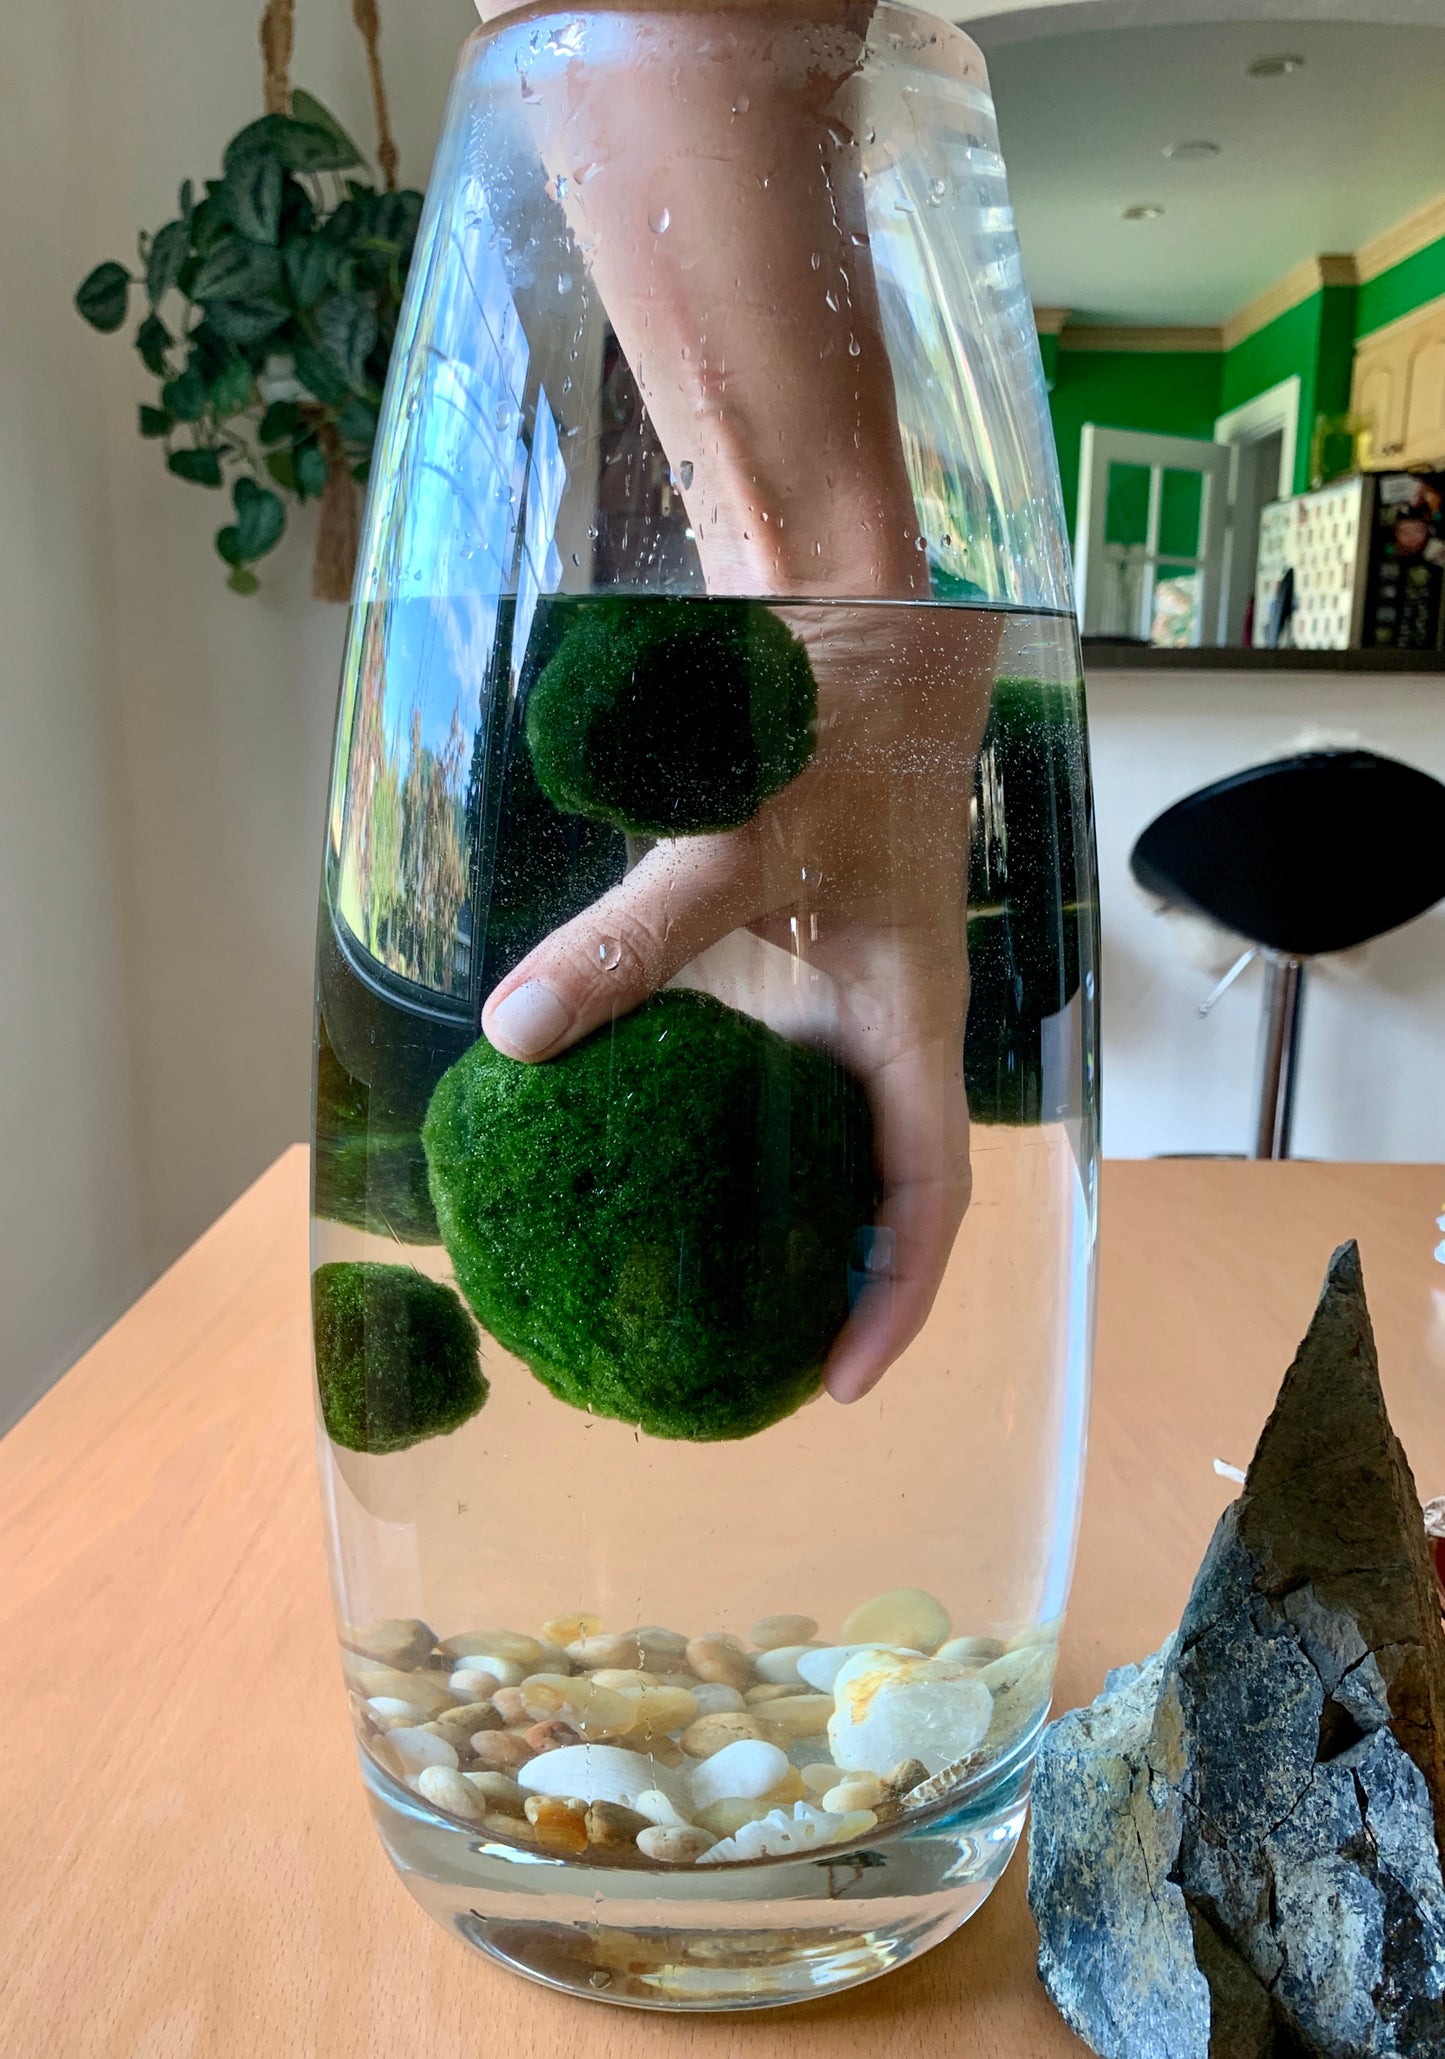 LARGE MARIMO MOSS BALL (2IN)